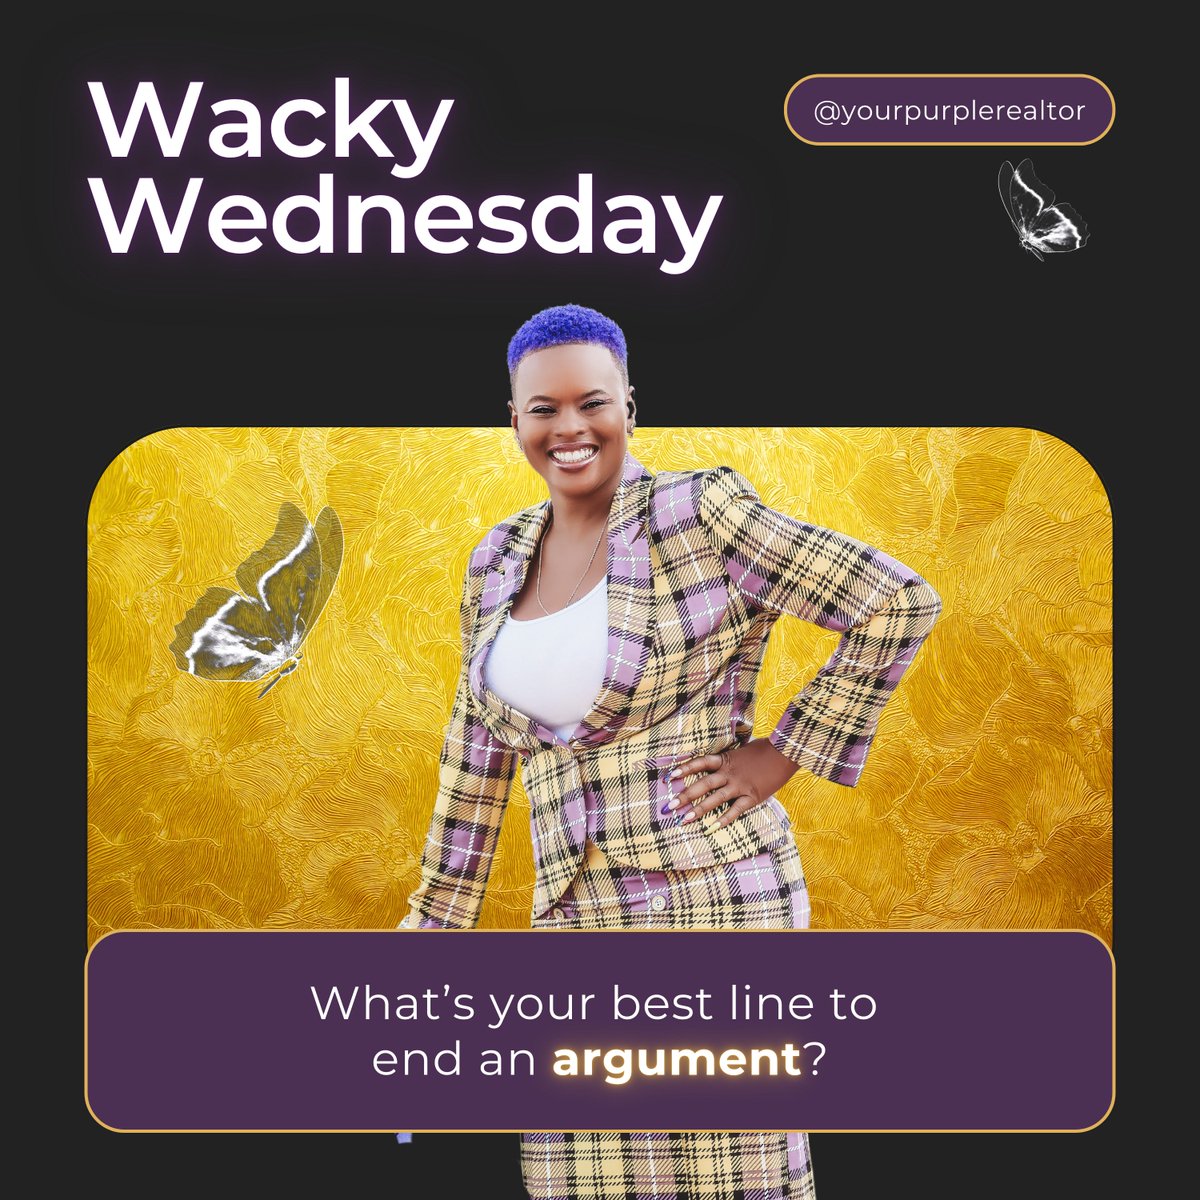 Ready for some wacky wisdom? What’s your best line to end an argument? 🤔💬 Share your secret weapon in the comments! #WackyWednesday #ArgumentEnders